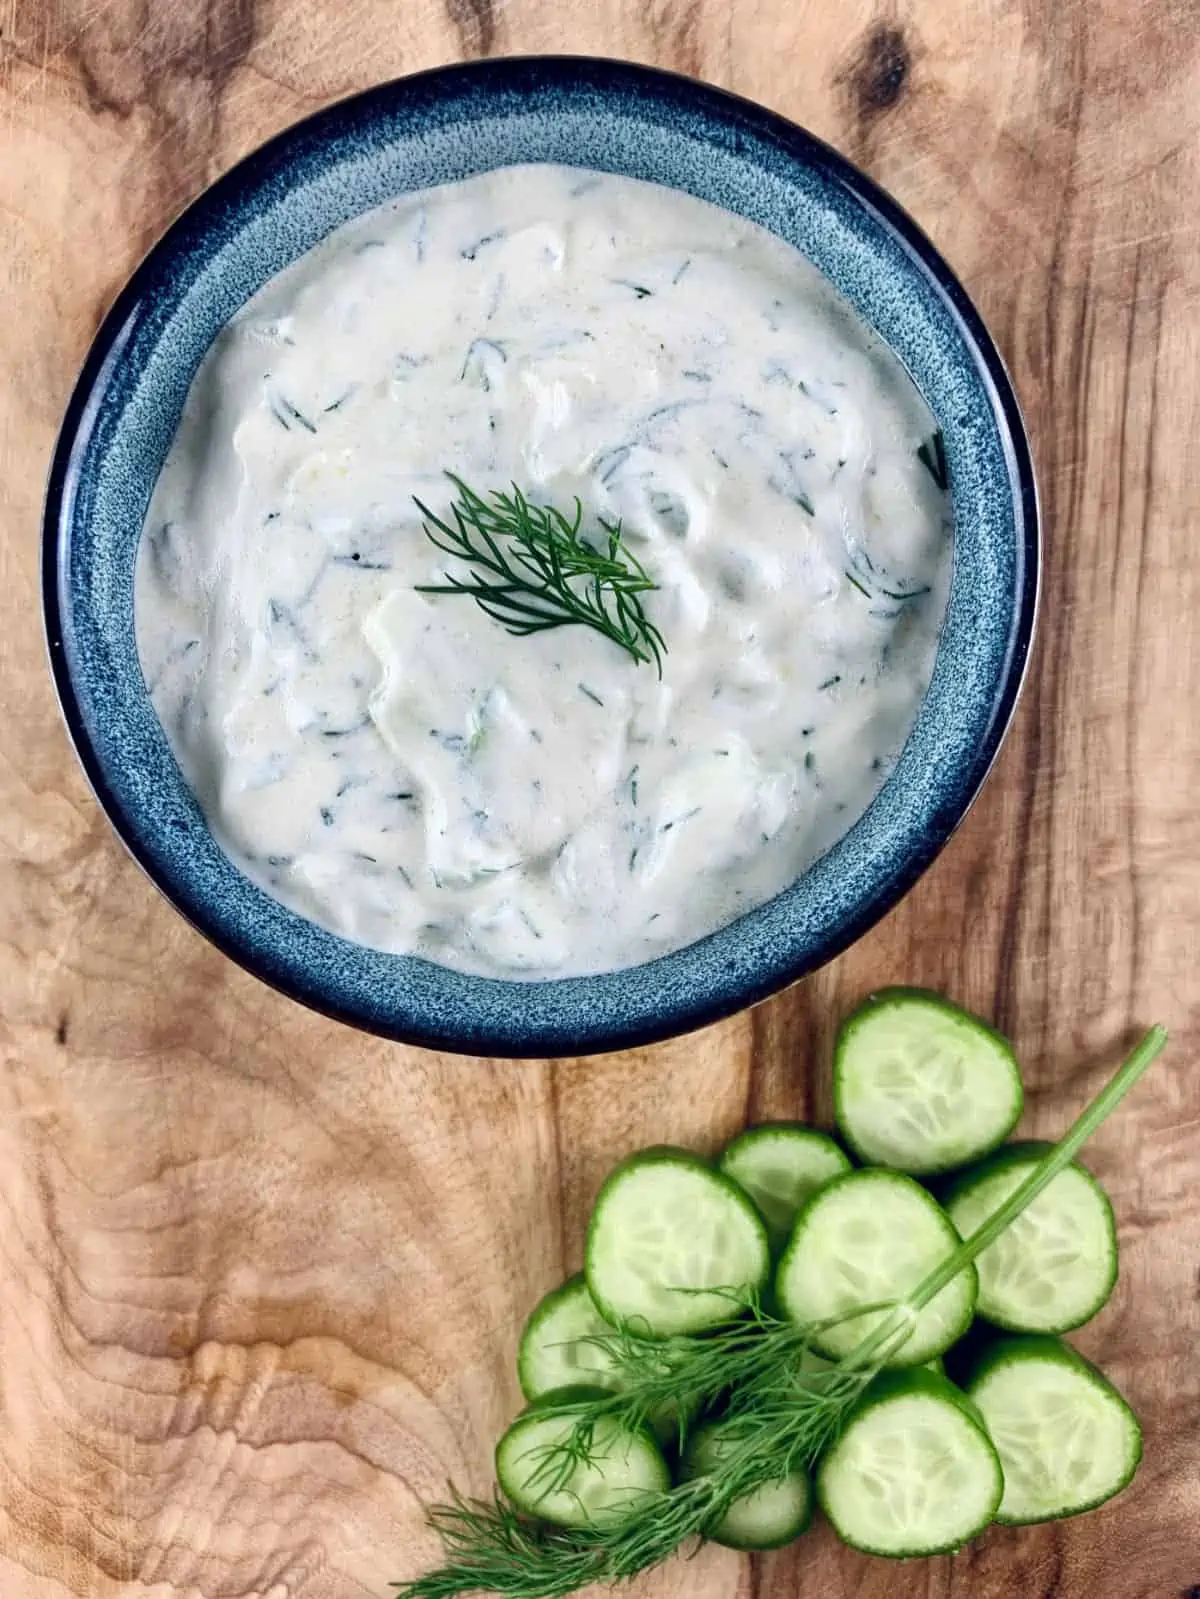 Our Authentic Tzatziki Recipe in a blue bowl with cucumber slices and dill sprig on the bottom left and sitting on a wooden board.